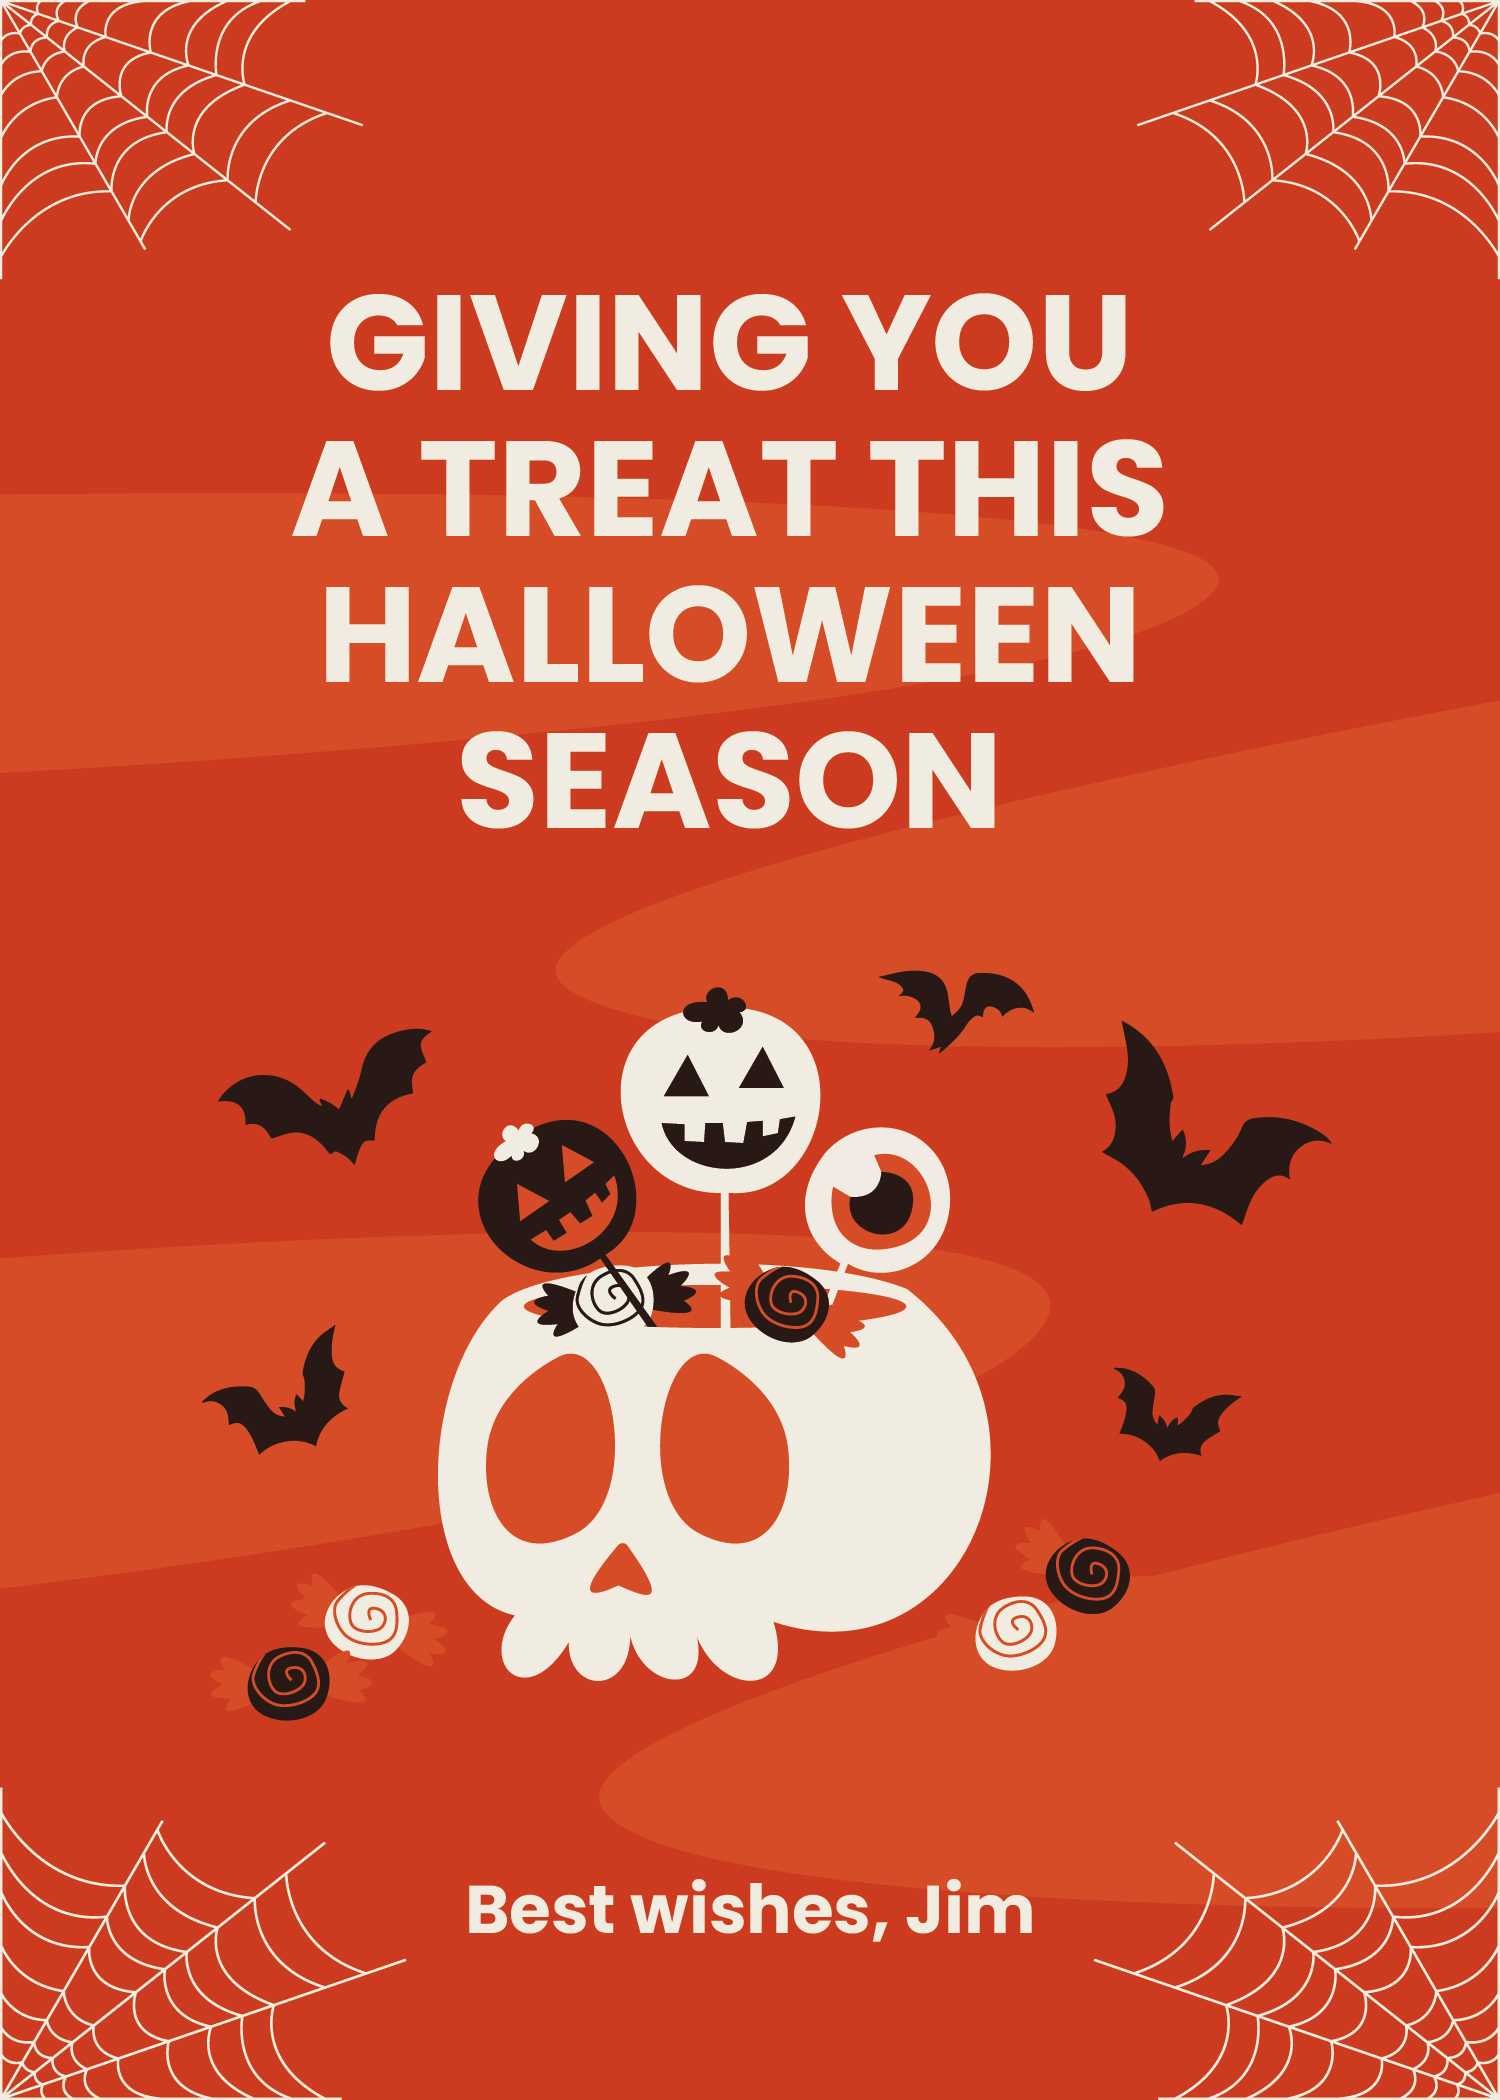 Free Halloween Best Wishes in Word, Google Docs, Illustrator, PSD, Apple Pages, Publisher, EPS, SVG, JPG, PNG